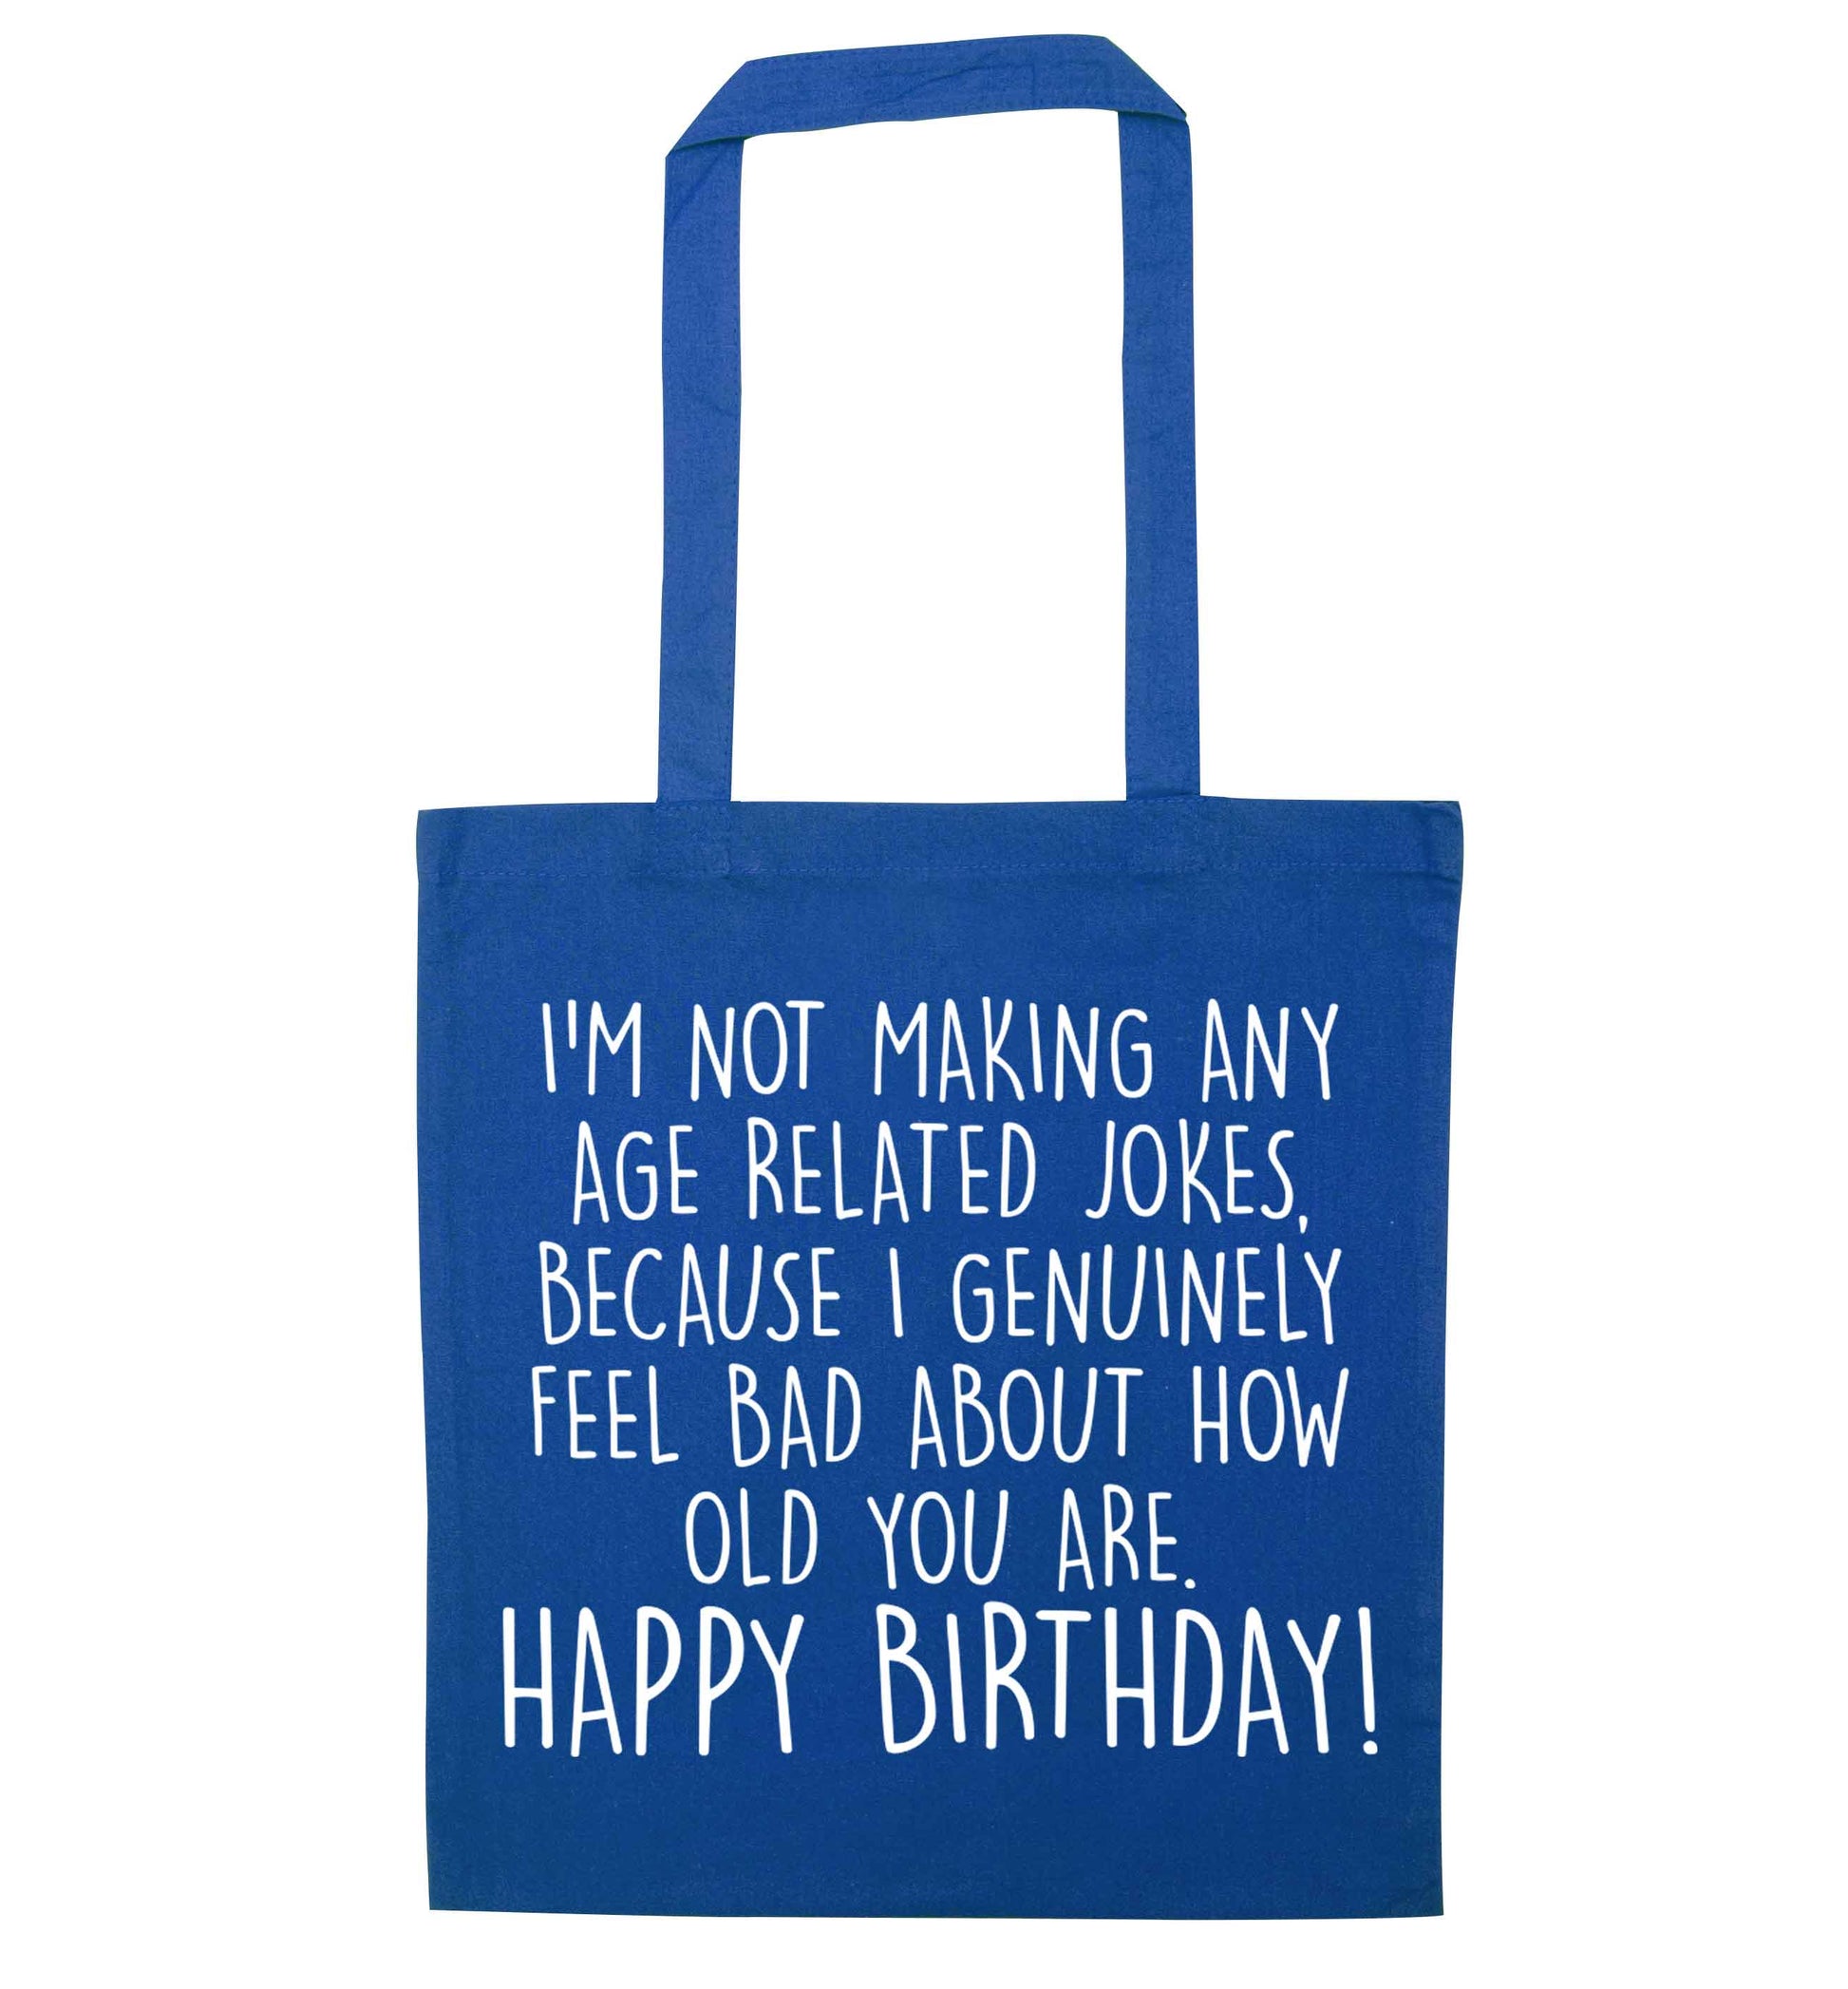 I'm not making any age related jokes because I genuinely feel bad for how old you are blue tote bag